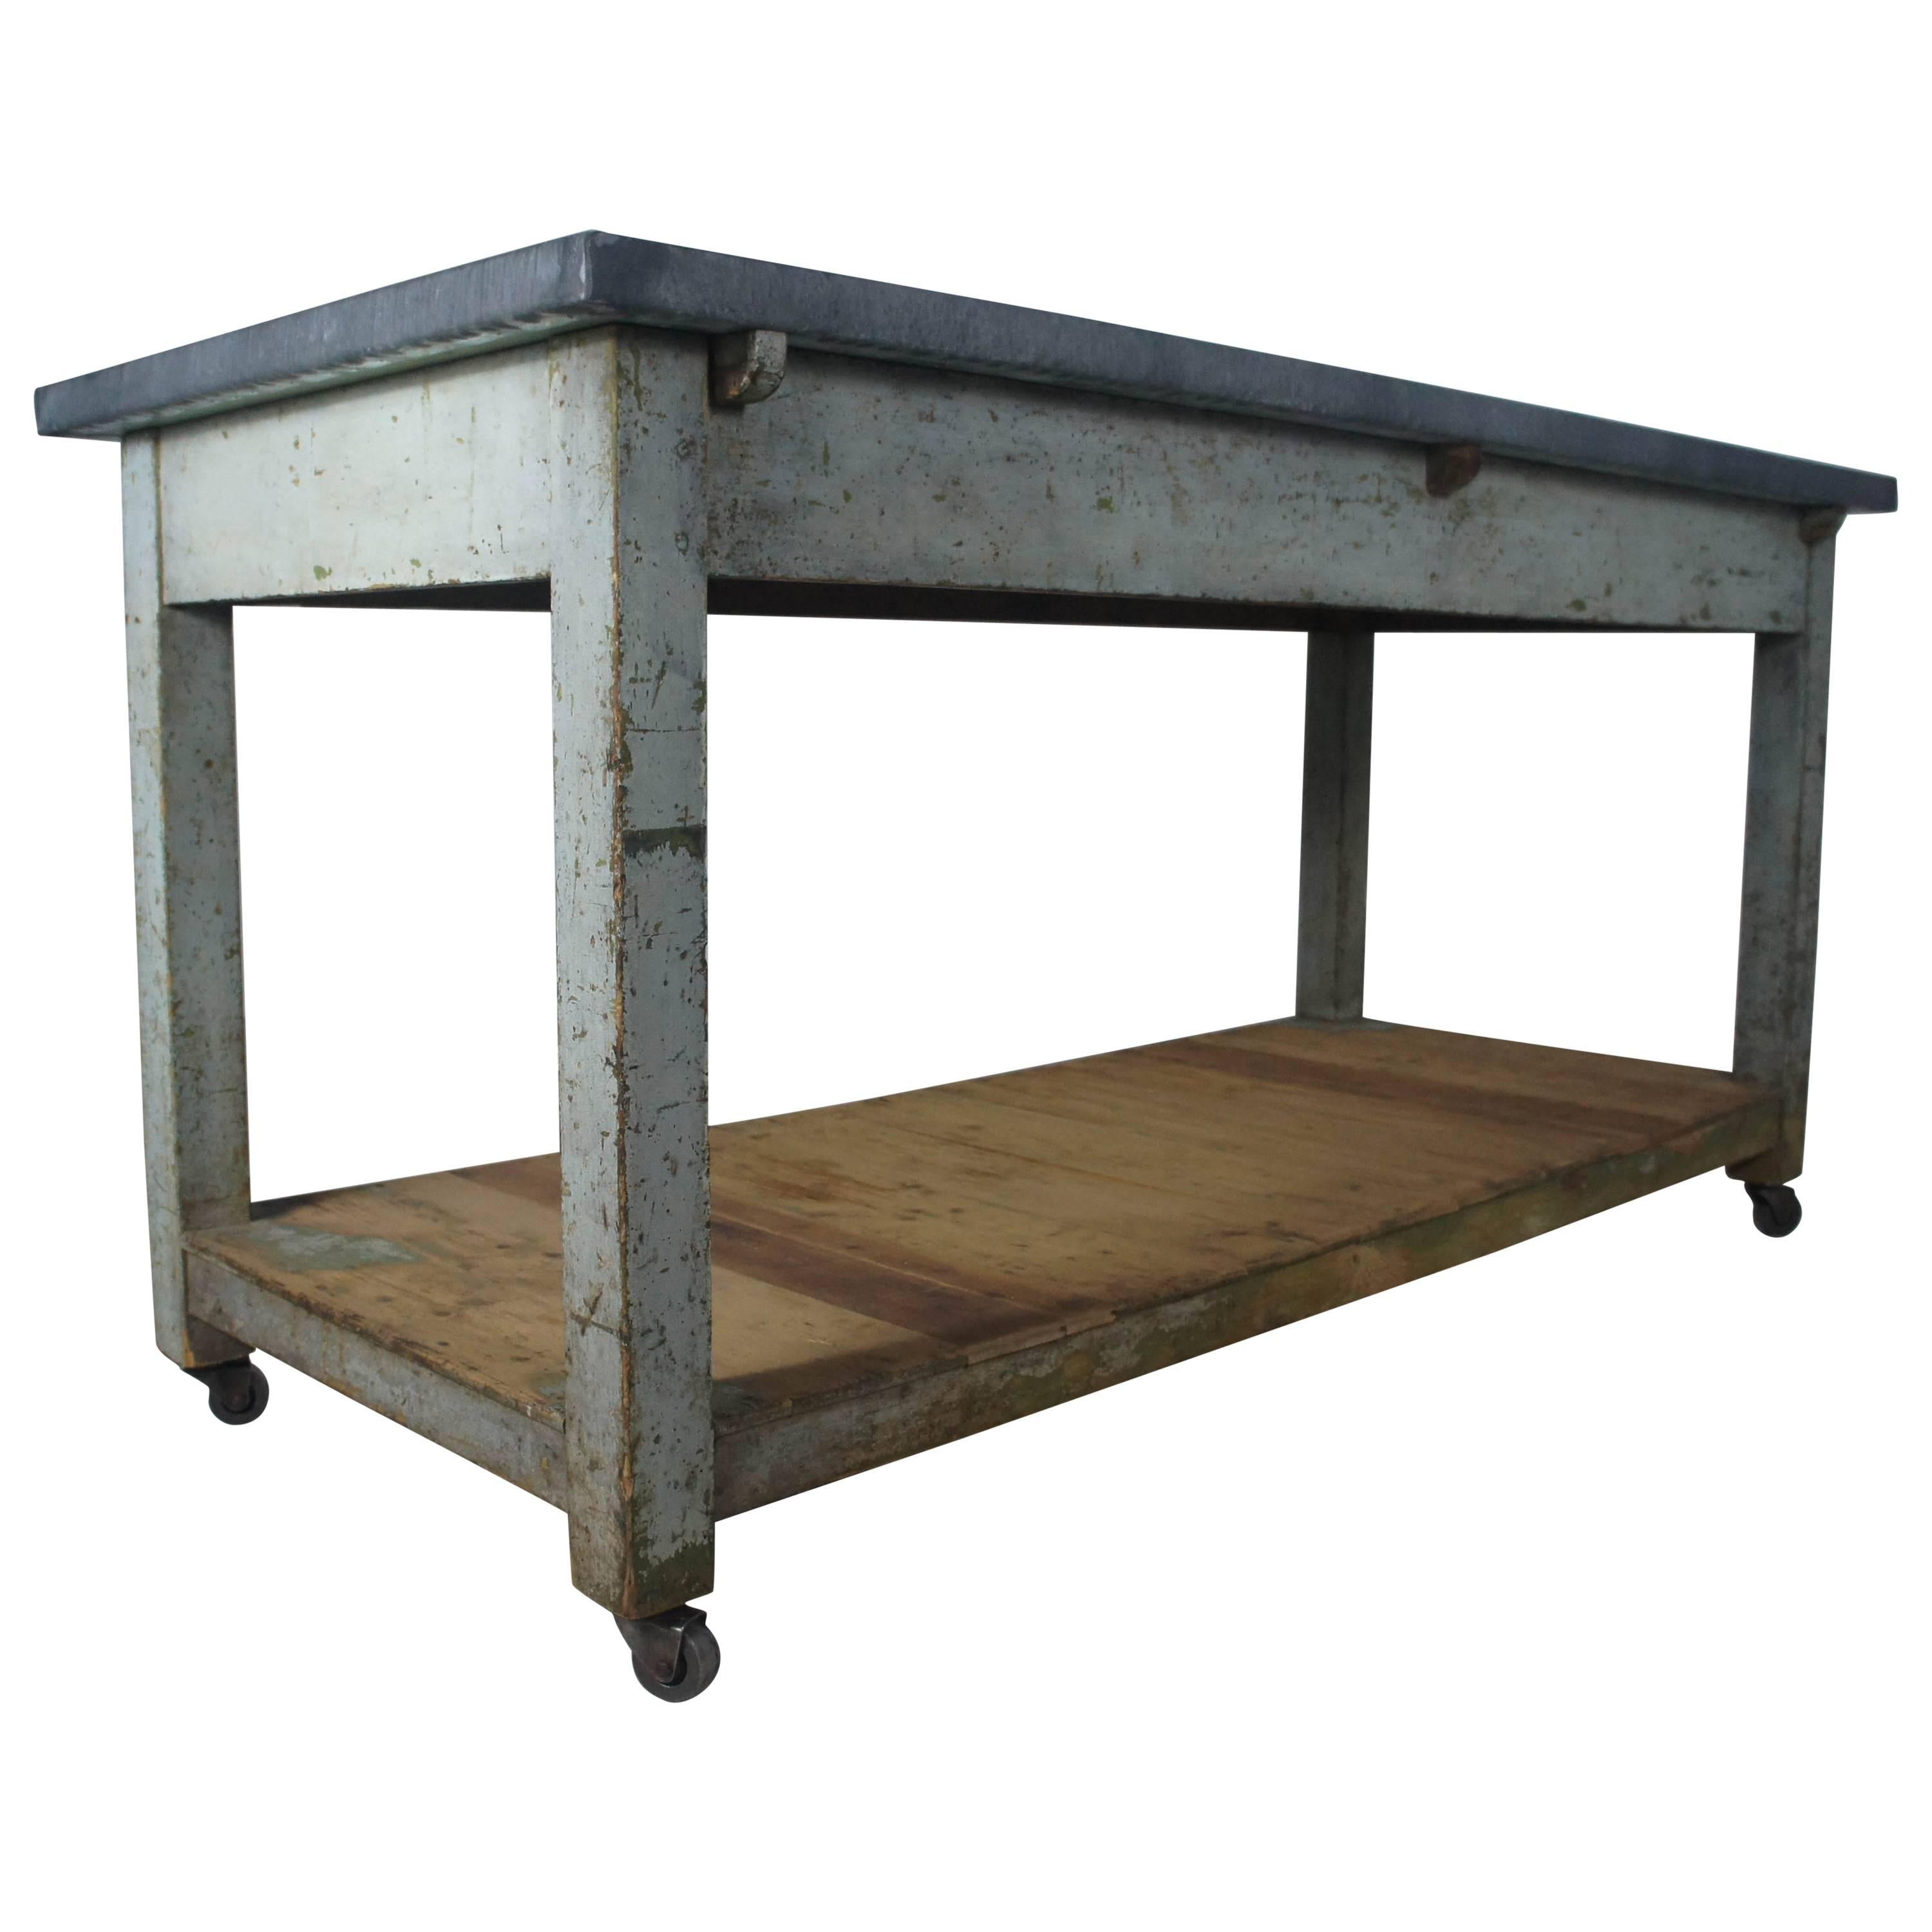 20th Century French Table, Sideboard or Kitchen Island with Zinc Top on Casters